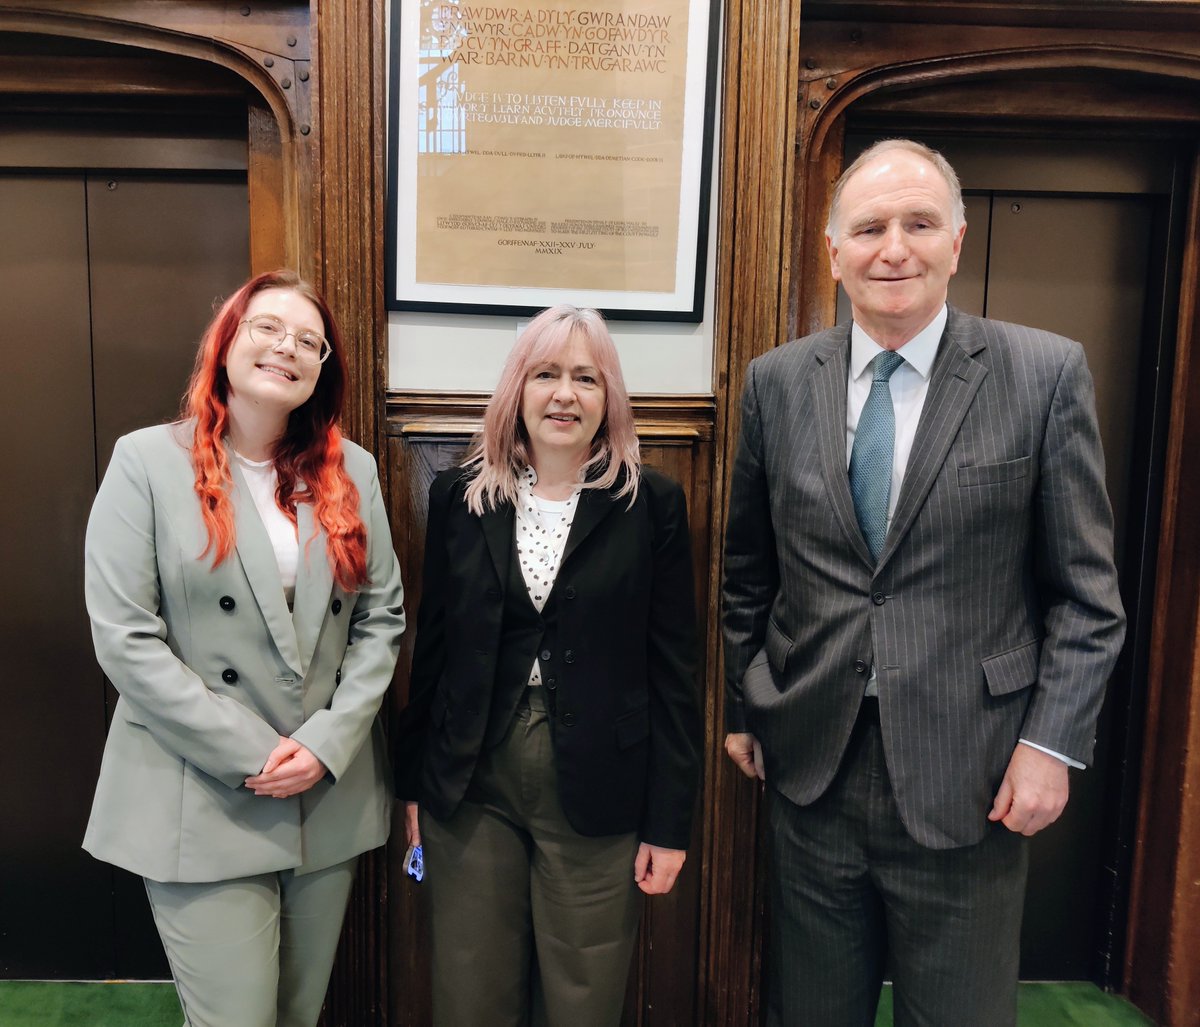 We were delighted to welcome Baroness Smith of Llanfaes and Liz Saville-Roberts MP for Dwyfor Meirionnydd to the Court today. Here they are photographed with Lord Lloyd-Jones in front of art work by Jonathan Adams. @CarmenRiaSmith @LSRPlaid @VickyFox_UKSC